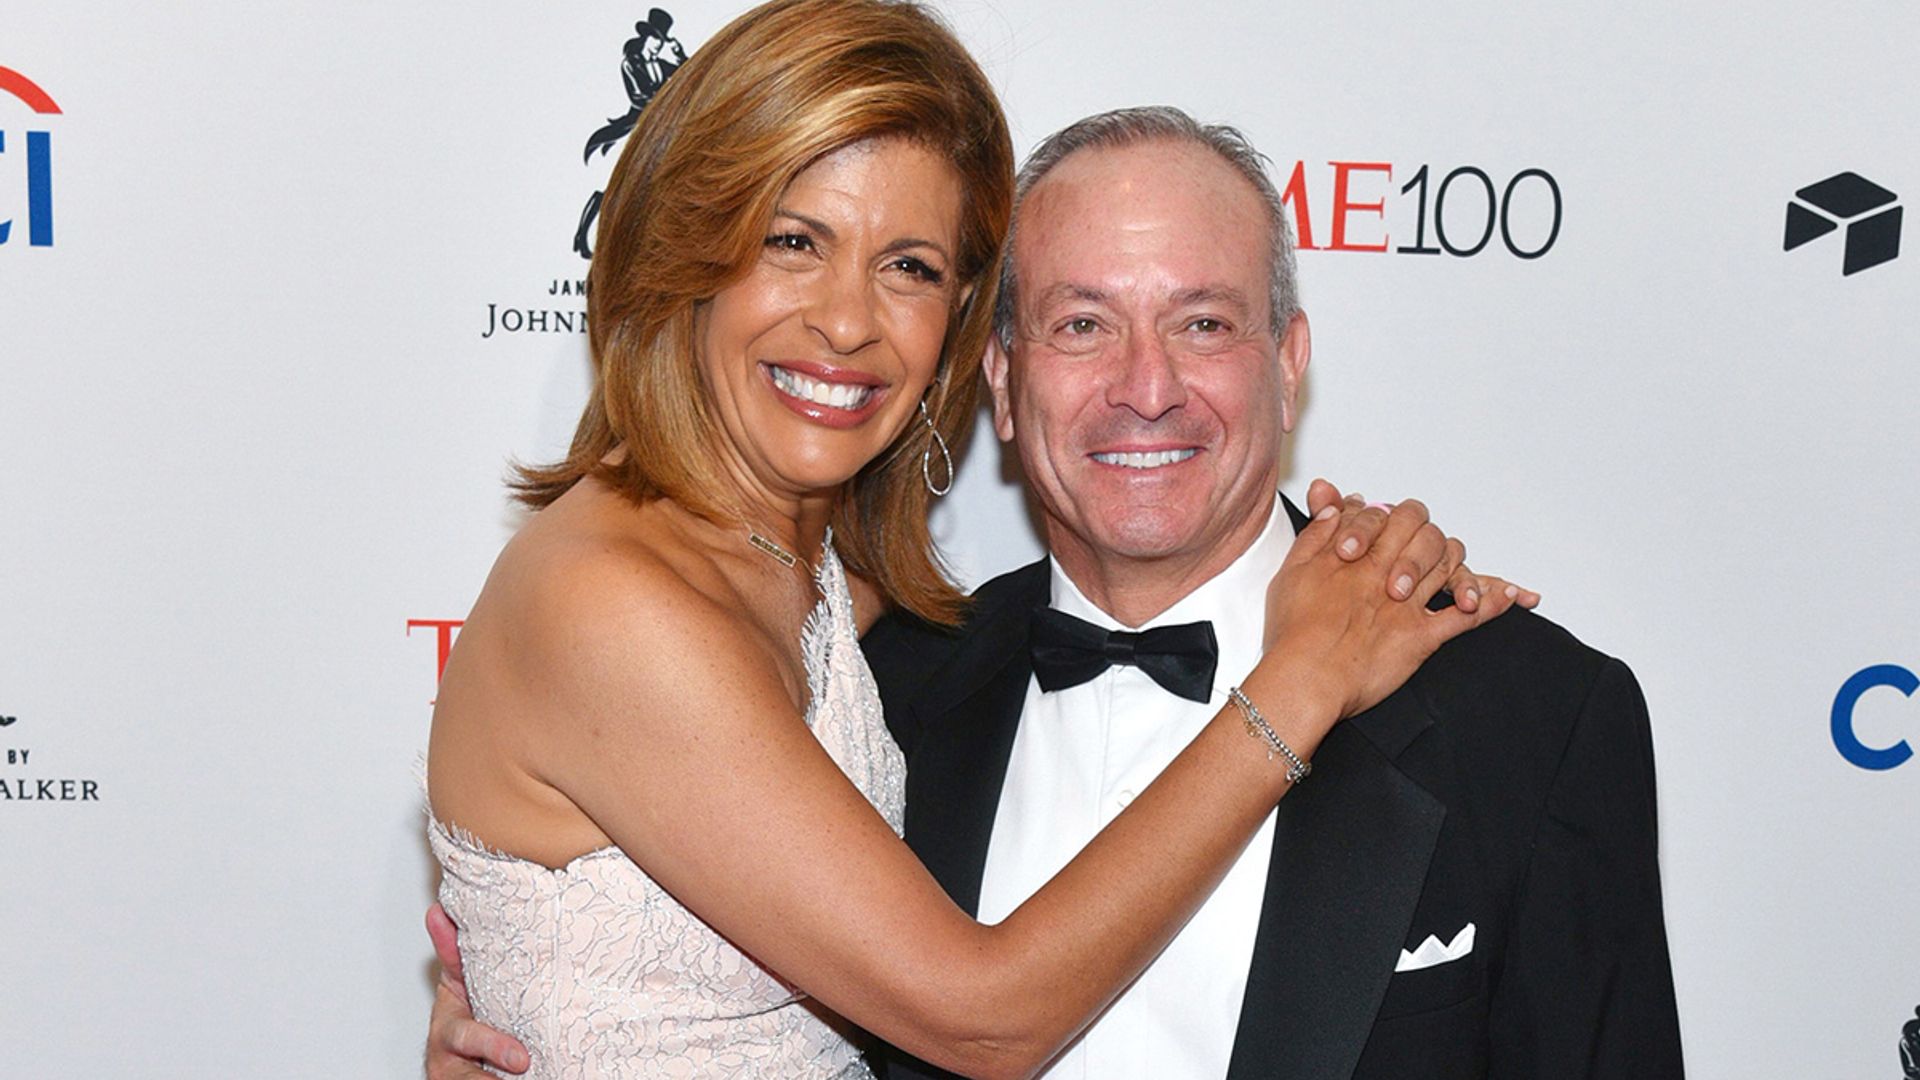 Hoda Kotb's one-of-a-kind $250k engagement ring isn't what she expected